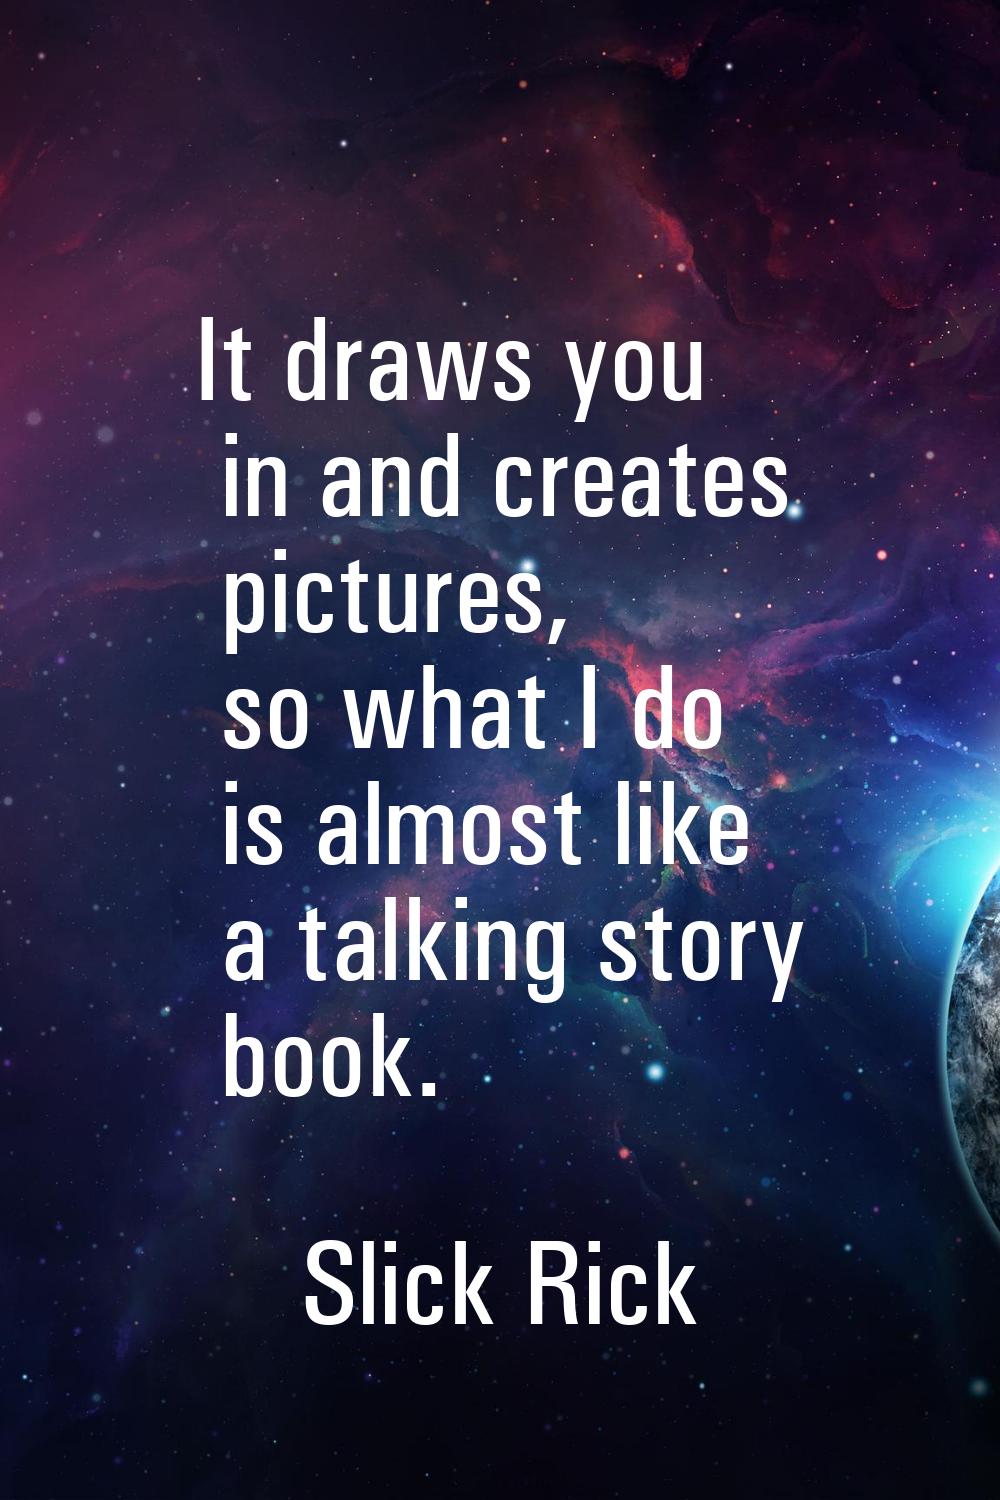 It draws you in and creates pictures, so what I do is almost like a talking story book.